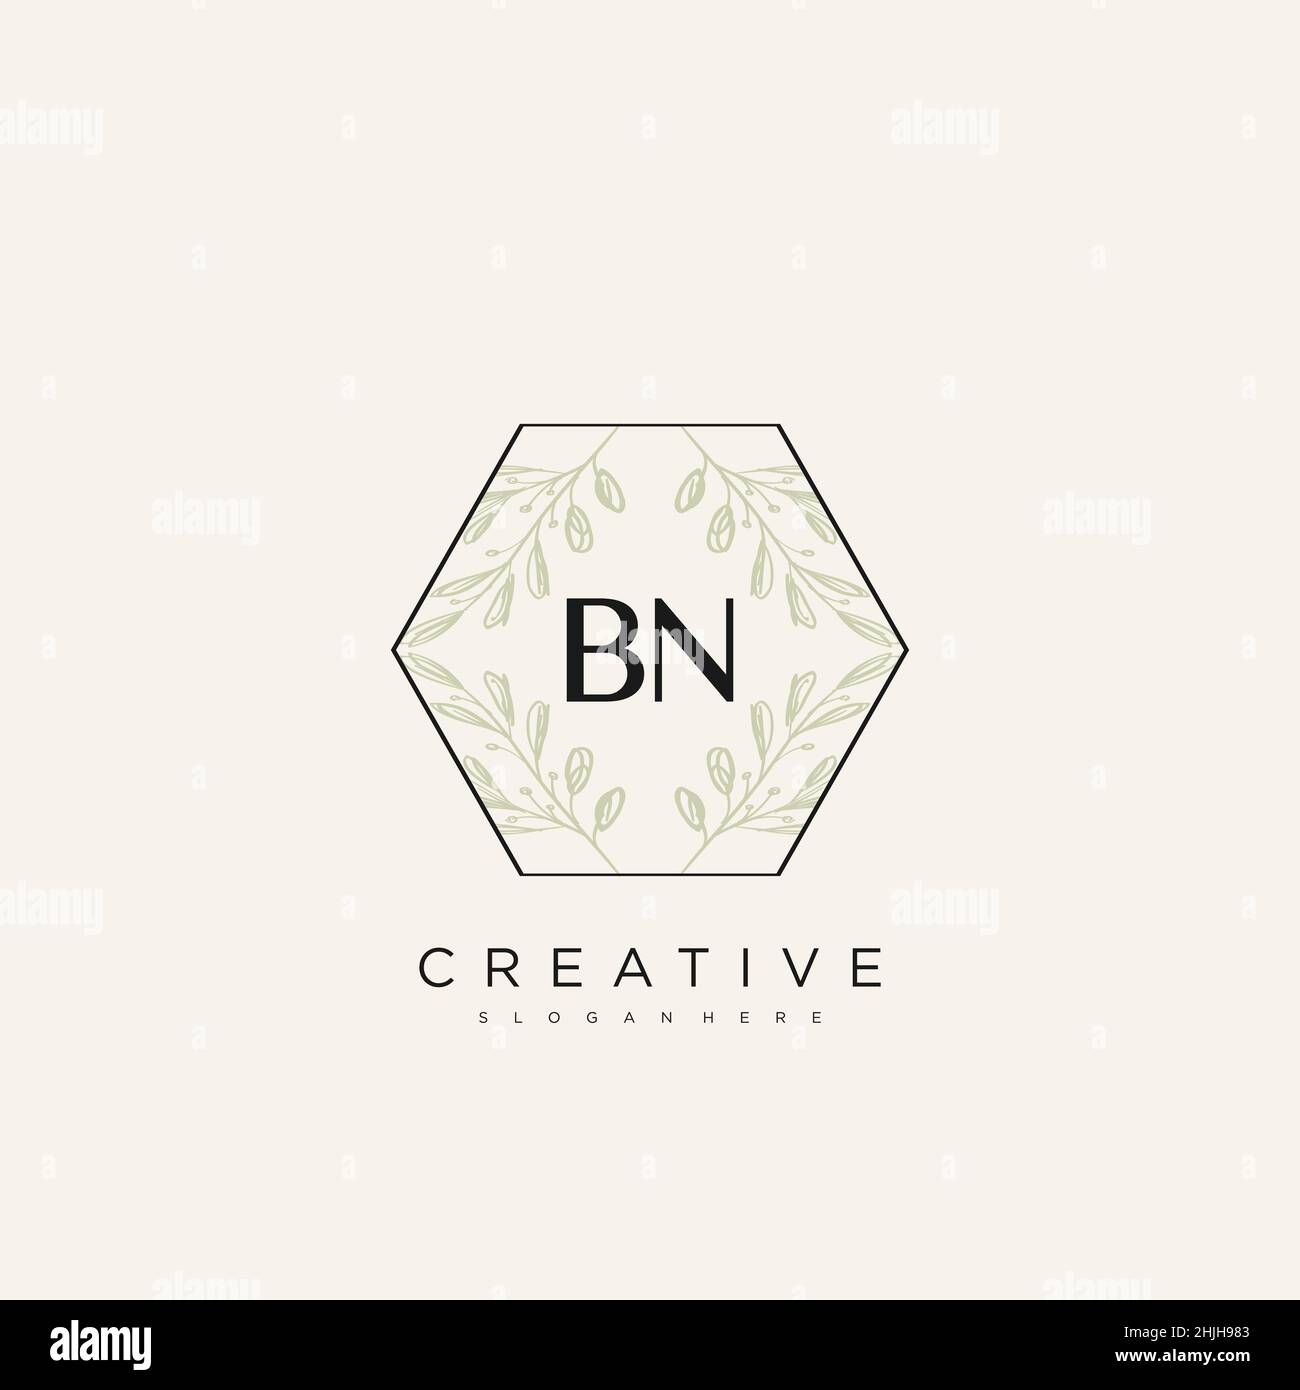 Bn sign Stock Vector Images - Alamy